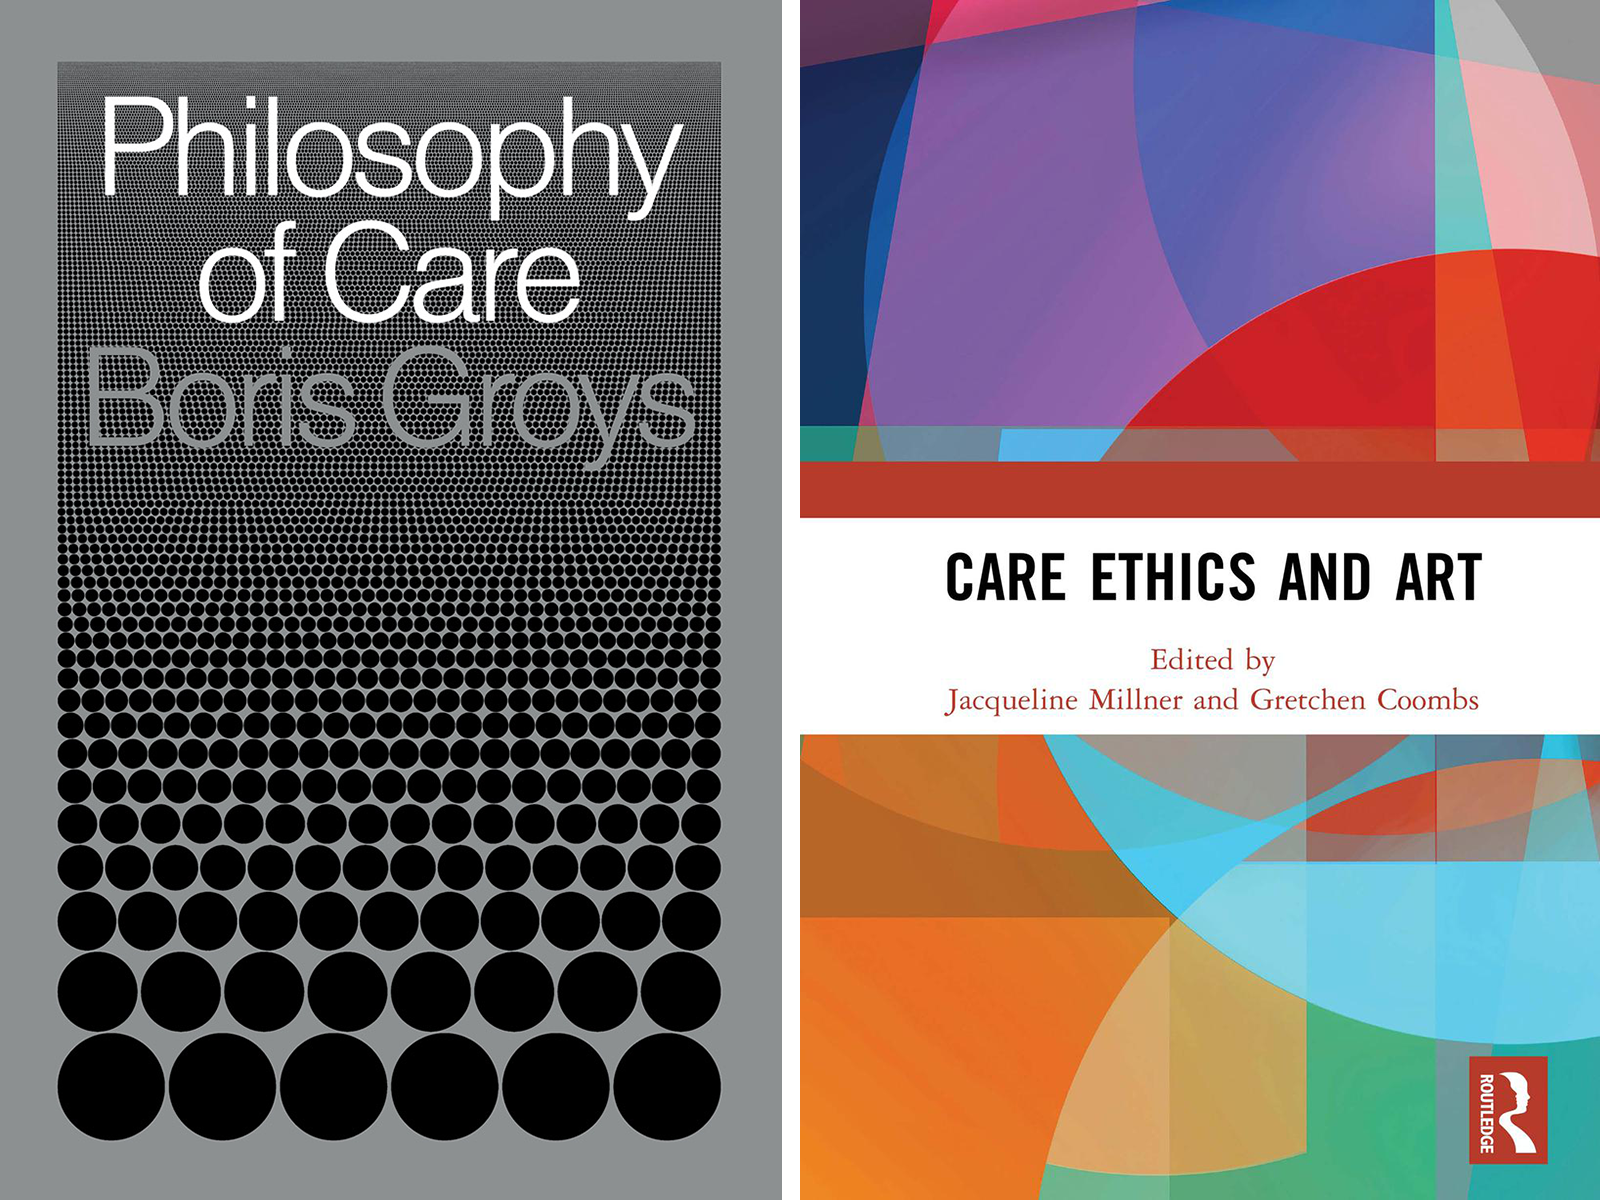 black and white book 'Philiosophy of Care' cover and one 'Care, Ethics and Art' colourful book cover 